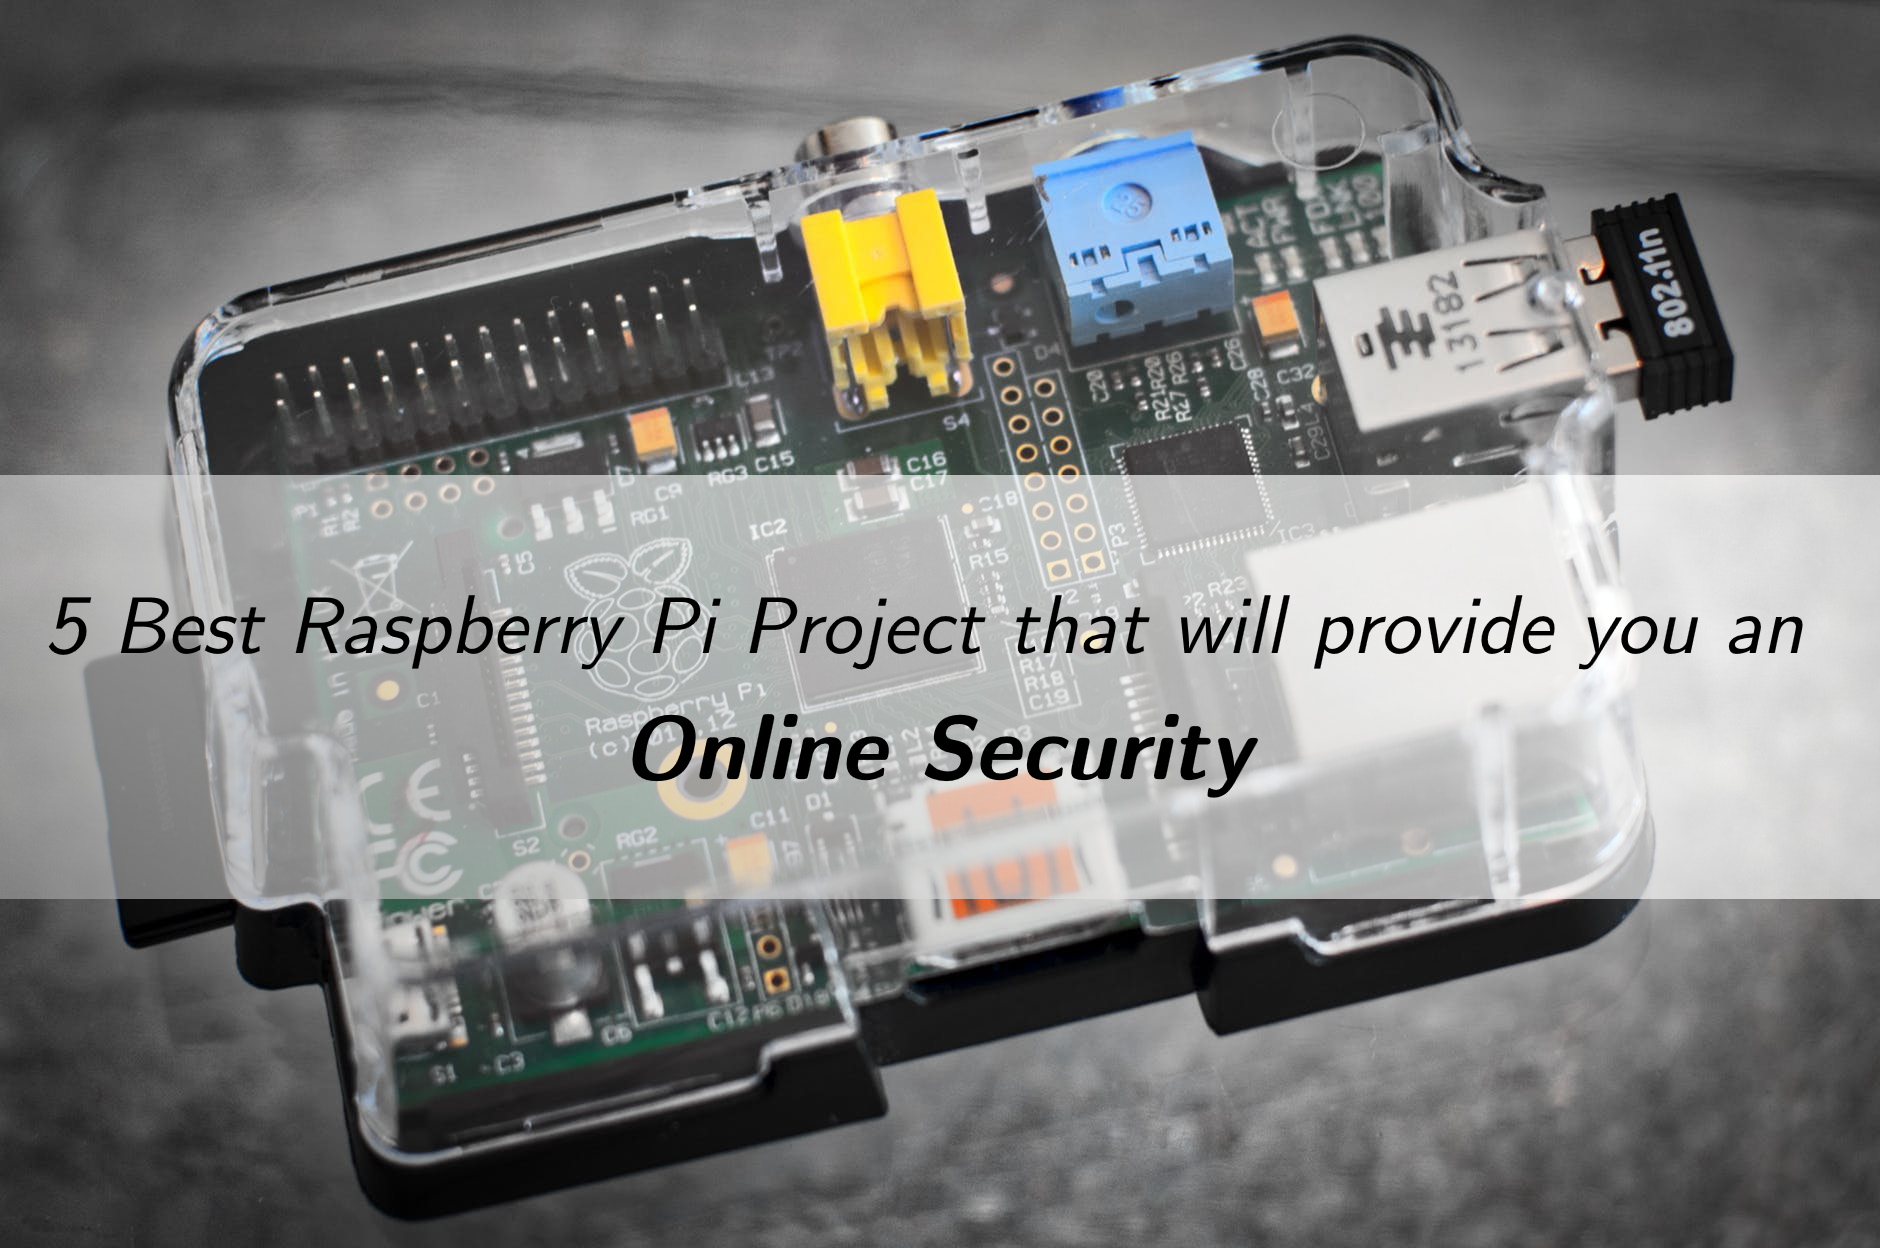 5 Best Raspberry Projects that will provide you online security